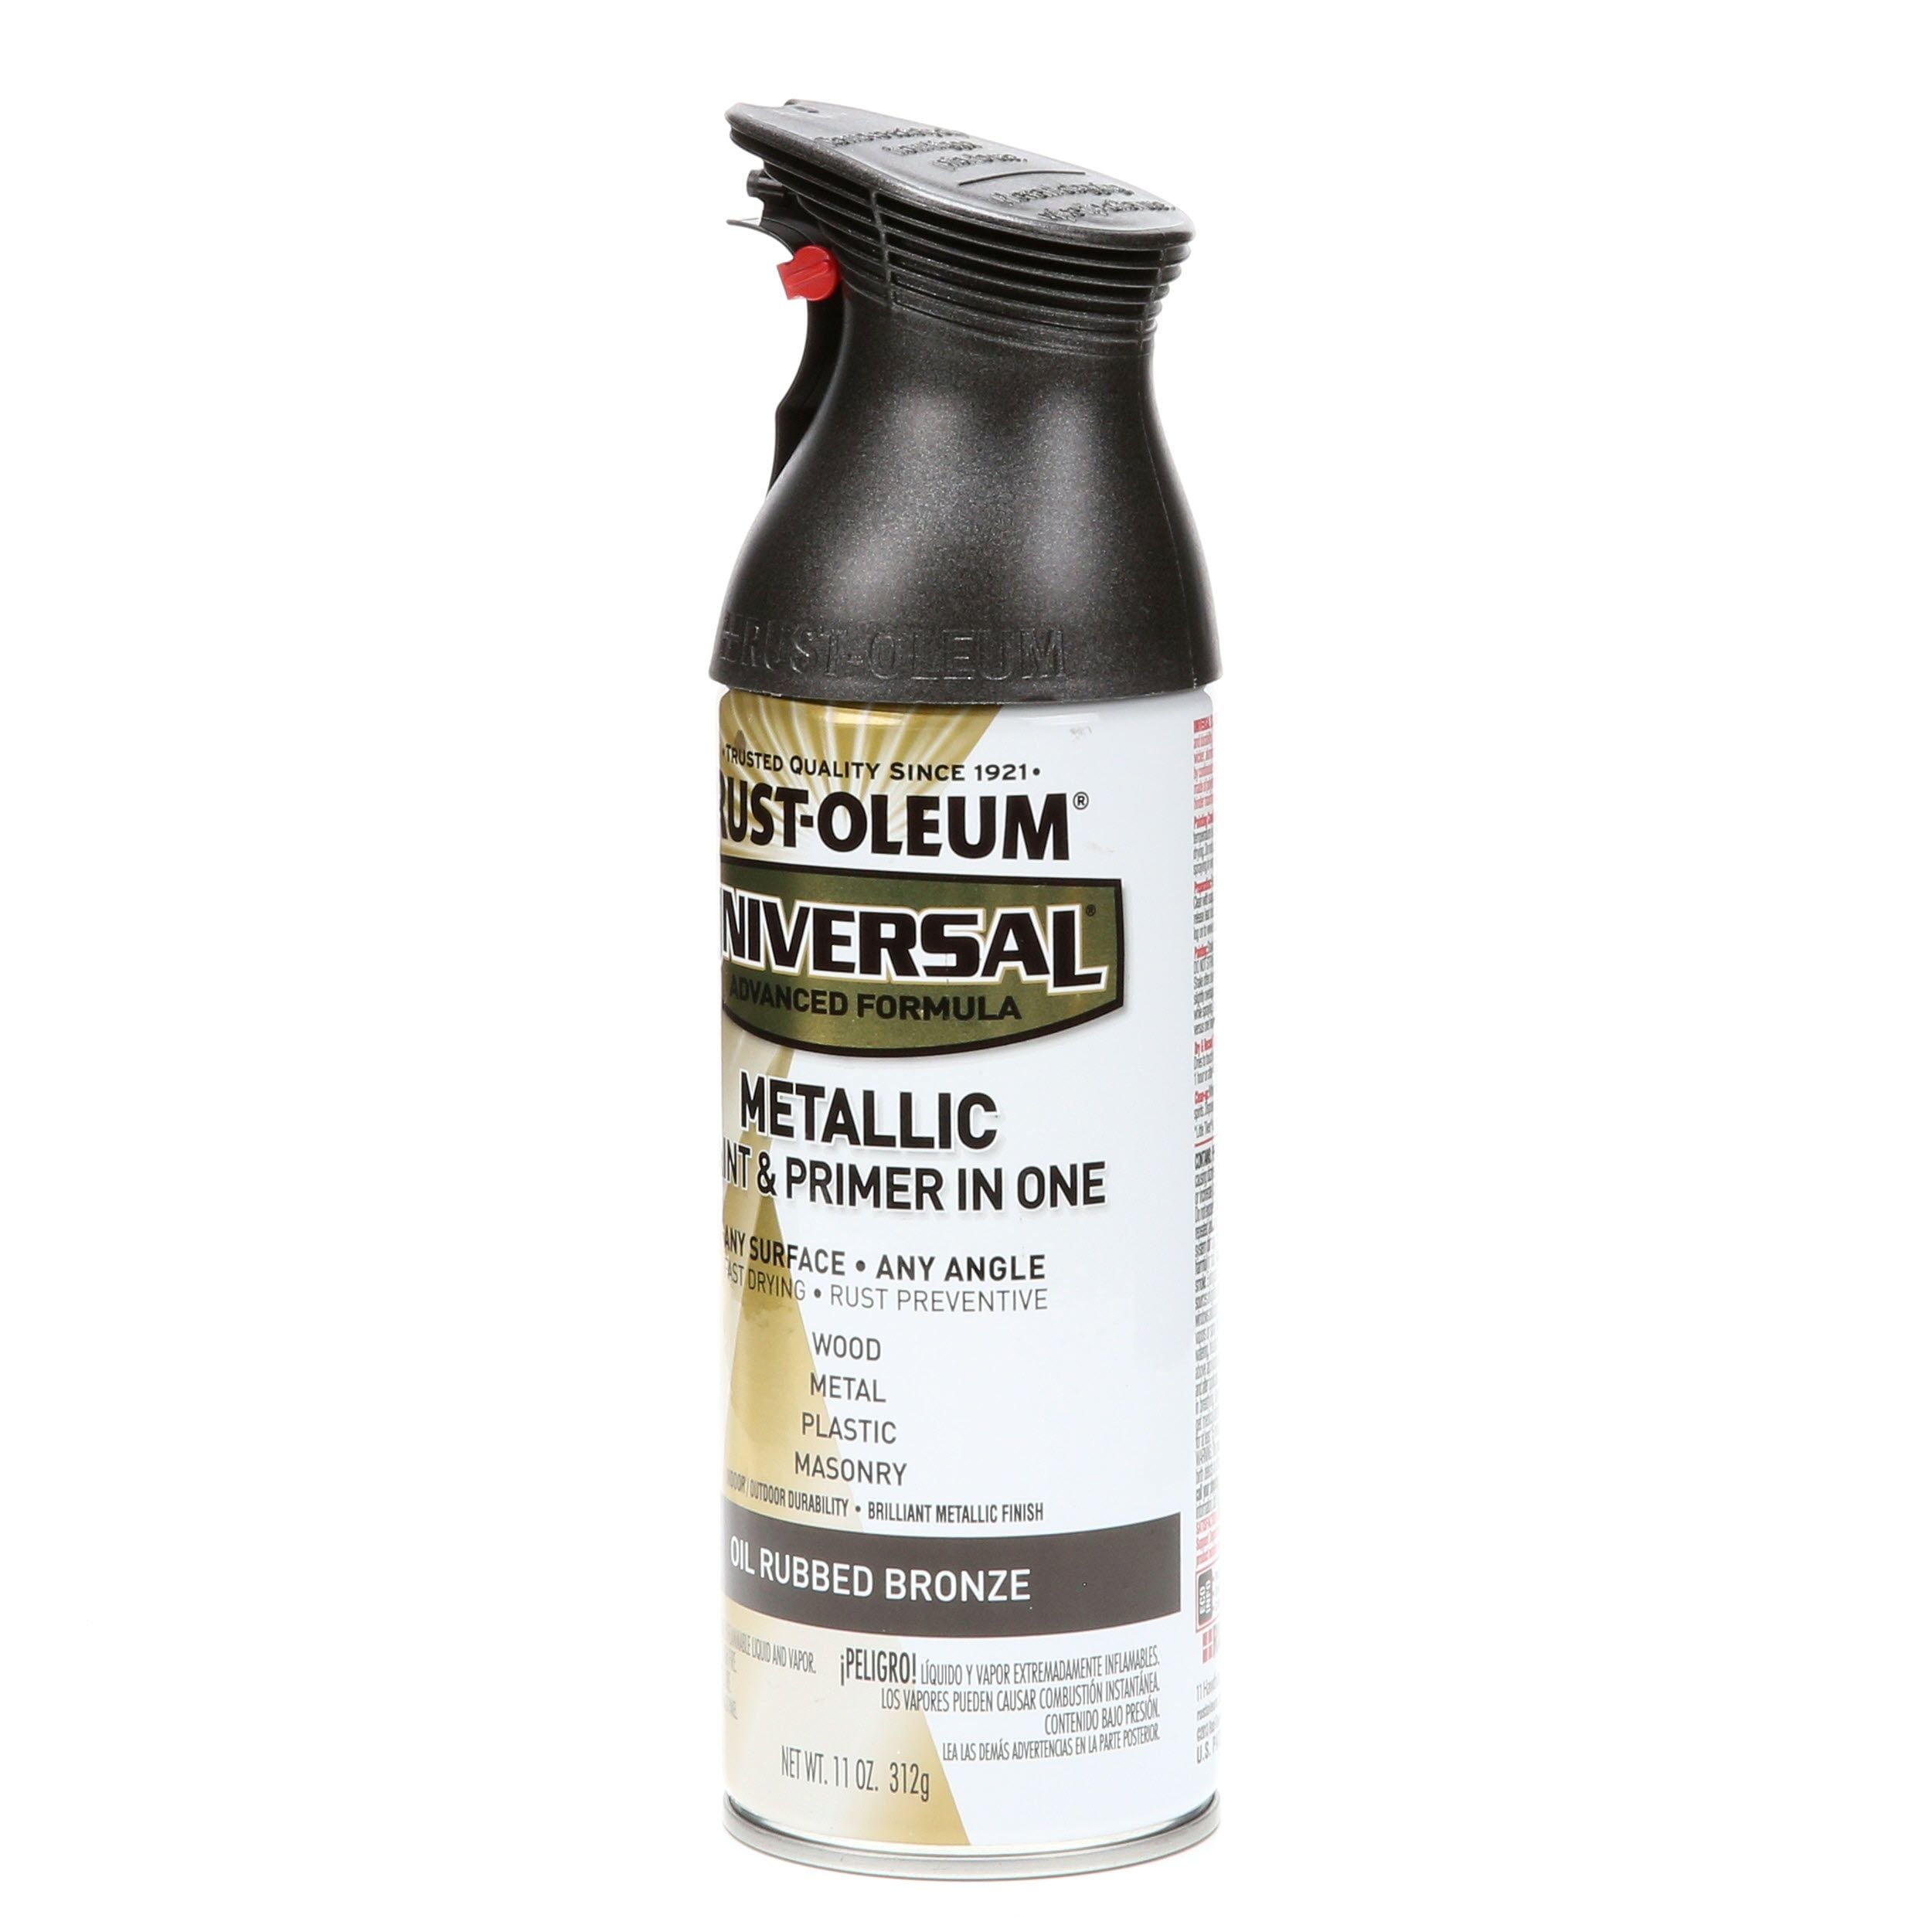 Rust-Oleum Universal Gloss Oil Rubbed Bronze Metallic Spray Paint and Primer In One (NET WT. 11-oz) in Spray Paint department at Lowes.com